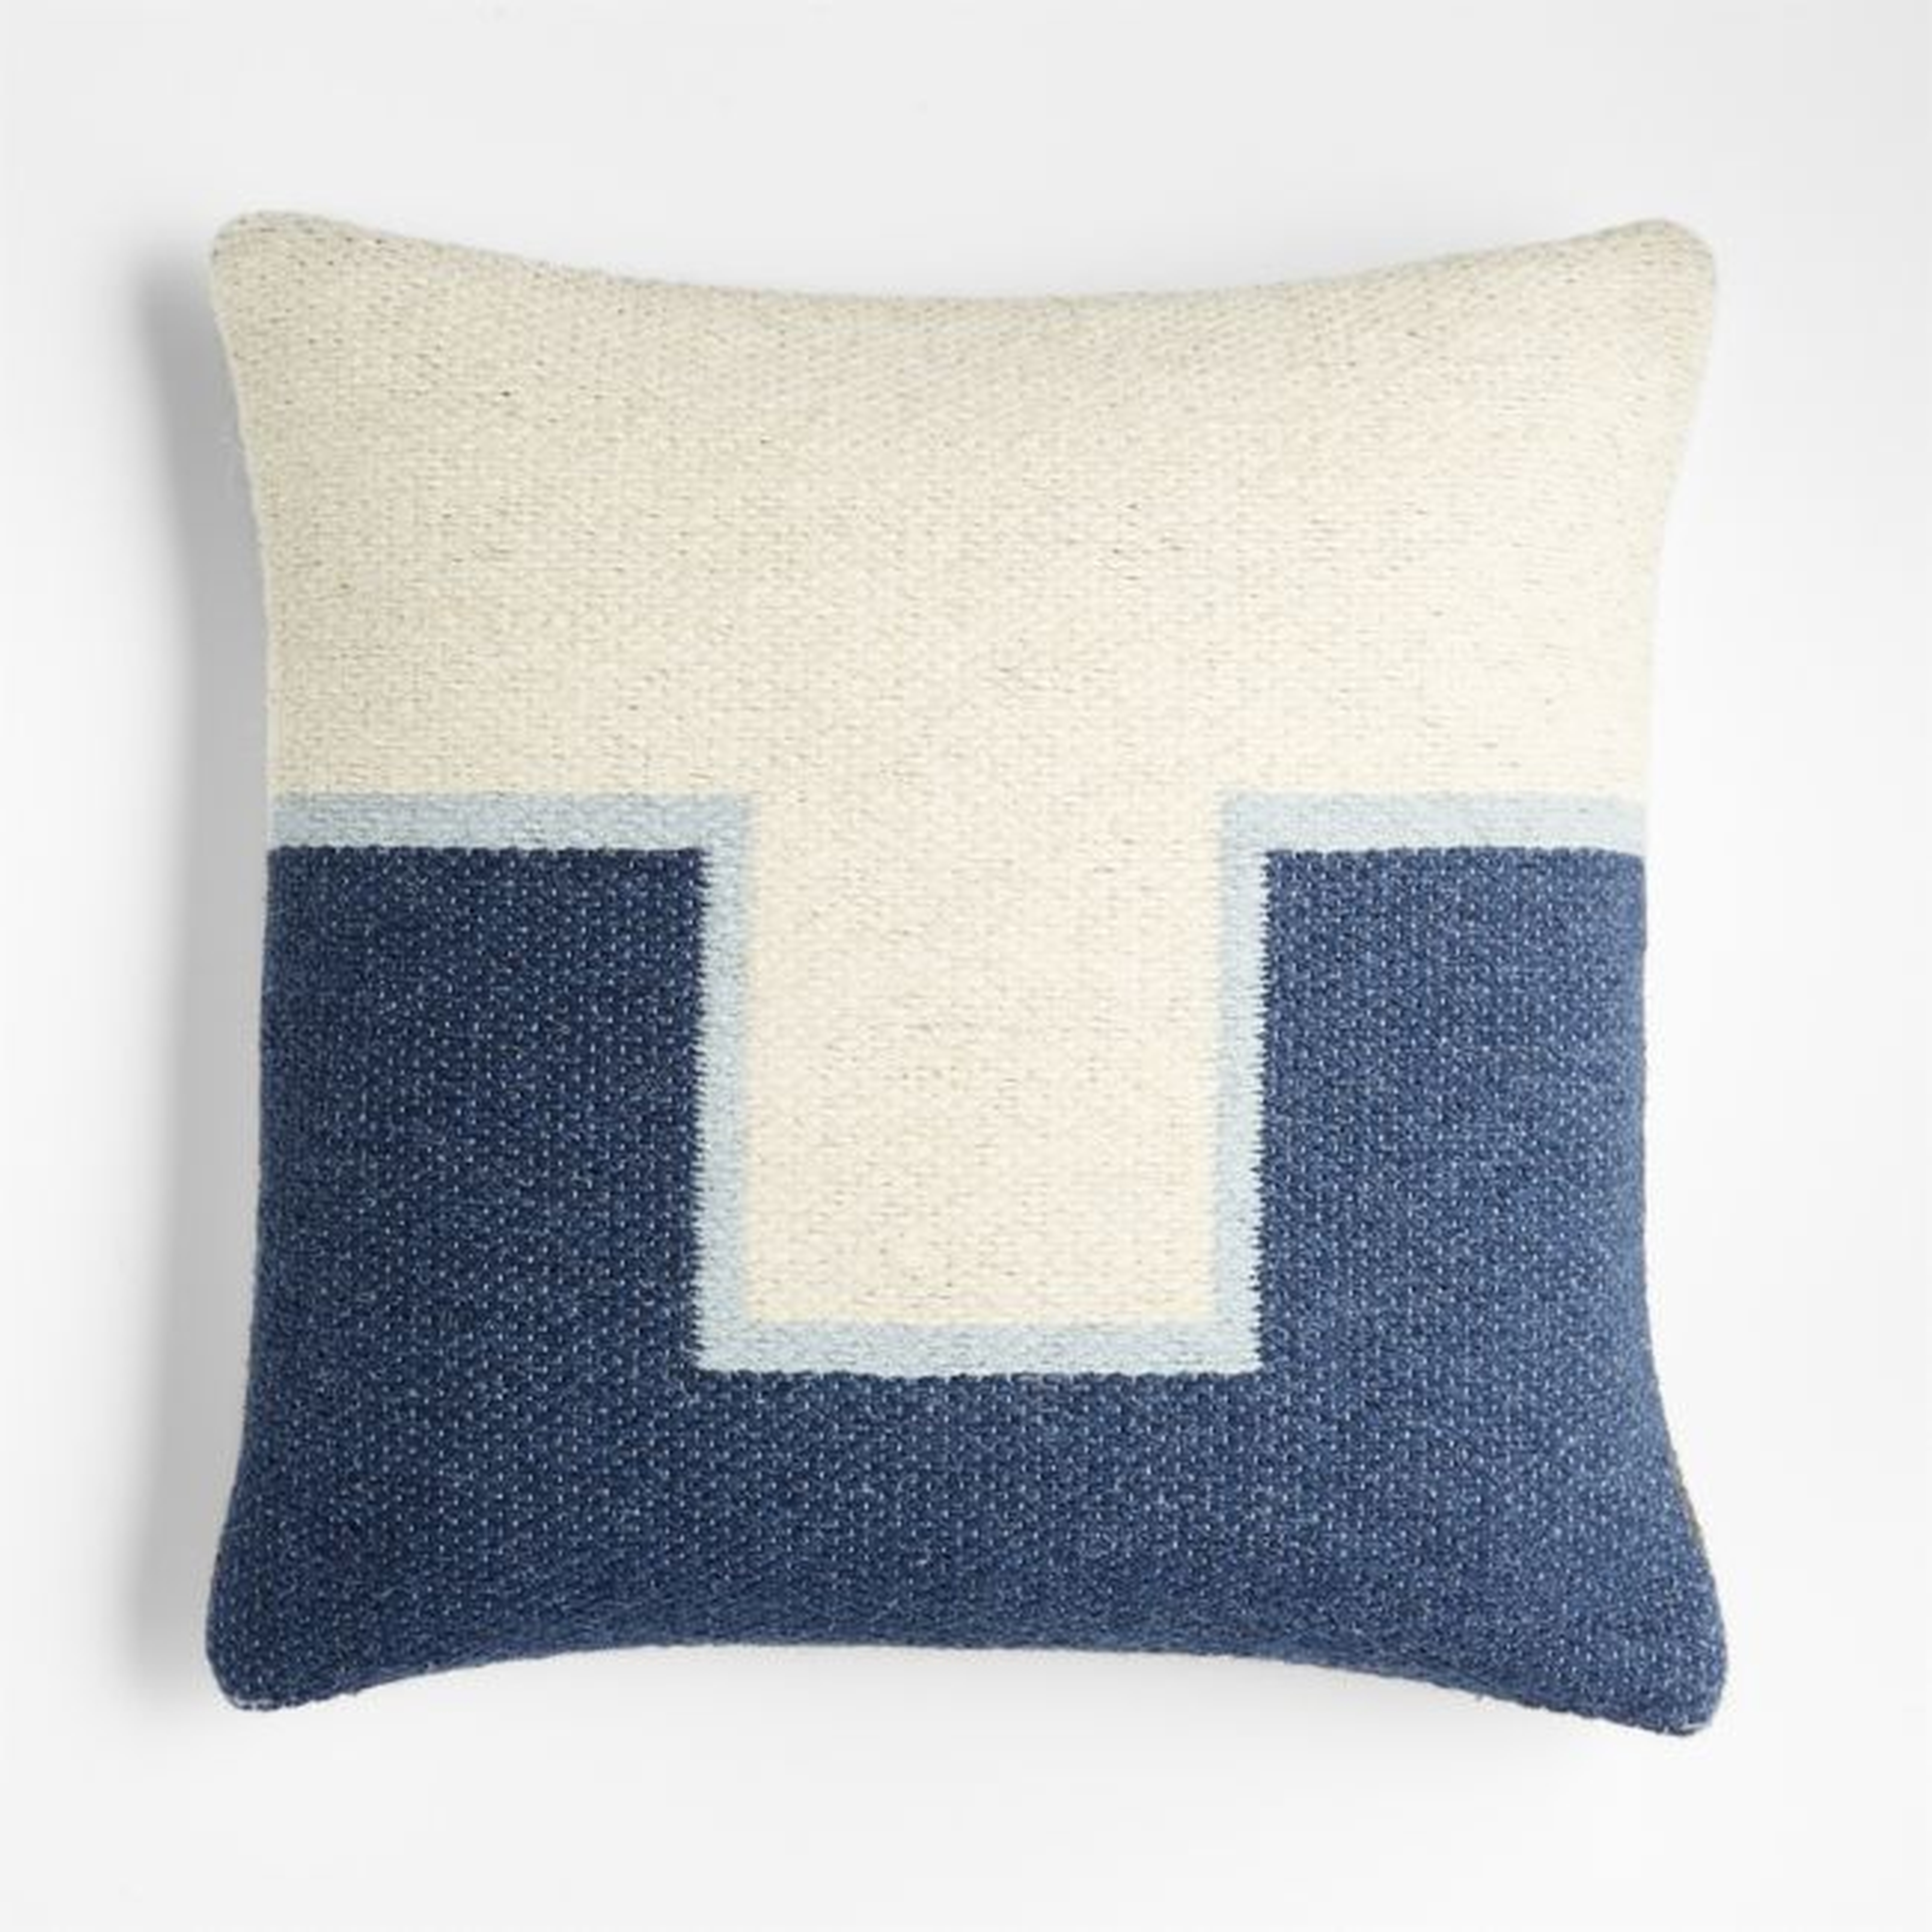 Ansom Pillow Cover, Down-Alternative Insert, Indigo, 20" x 20" - Crate and Barrel